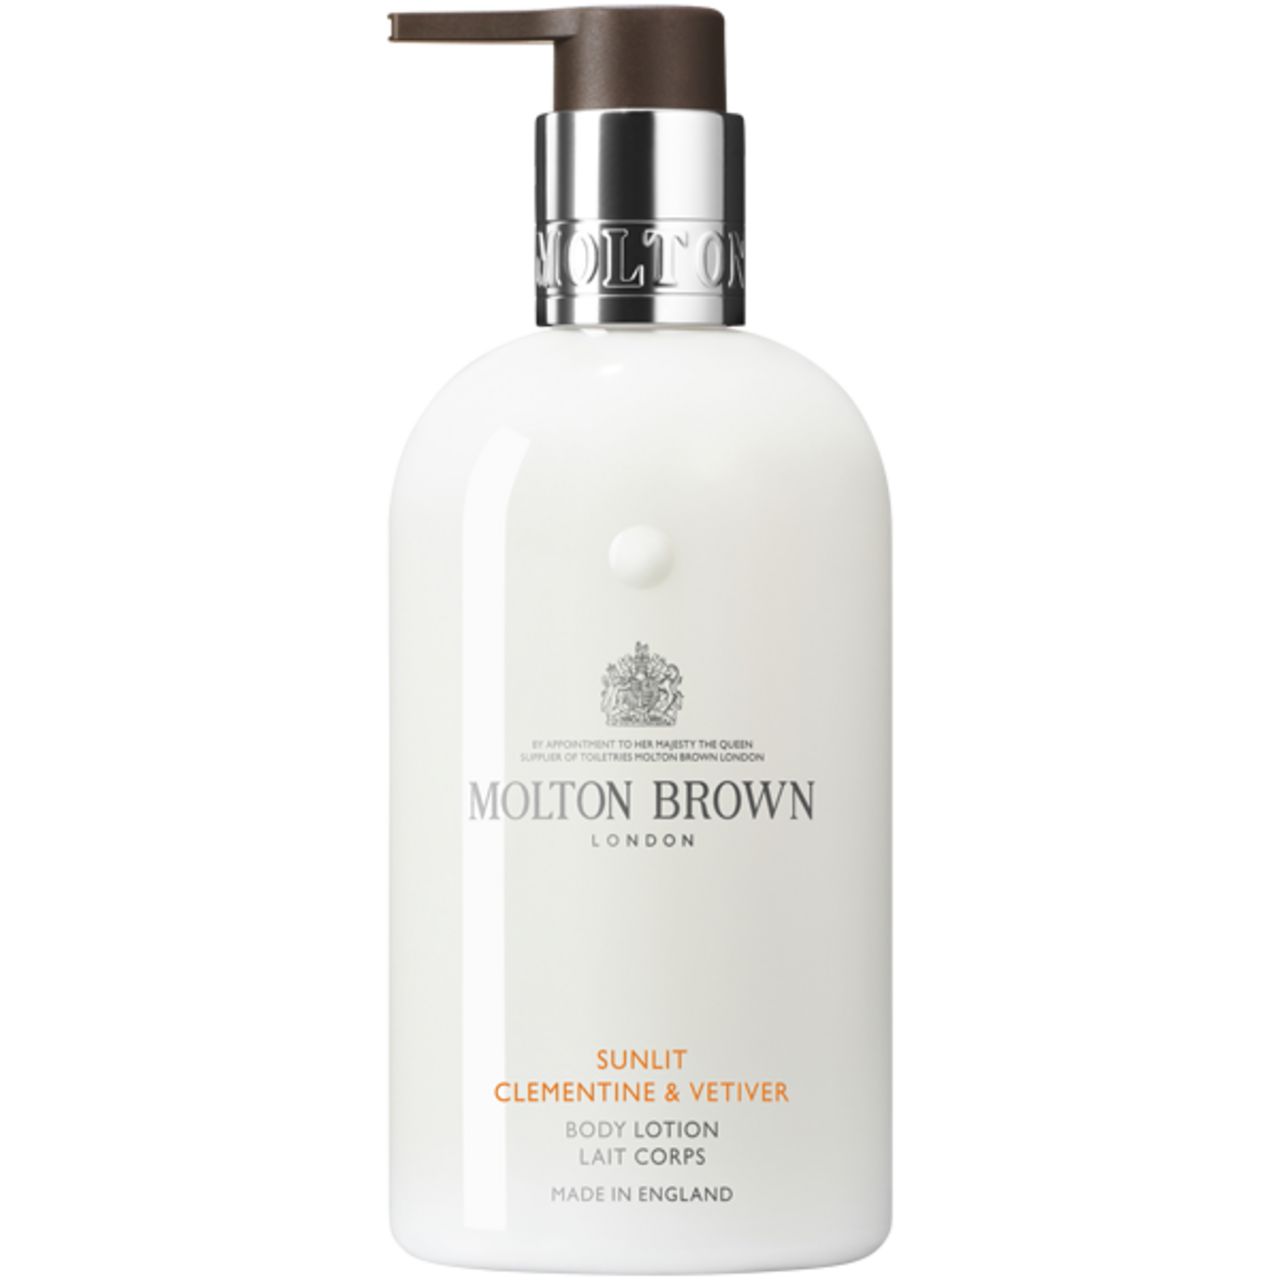 Molton Brown, Sunlit Clementine & Vetiver Body Lotion